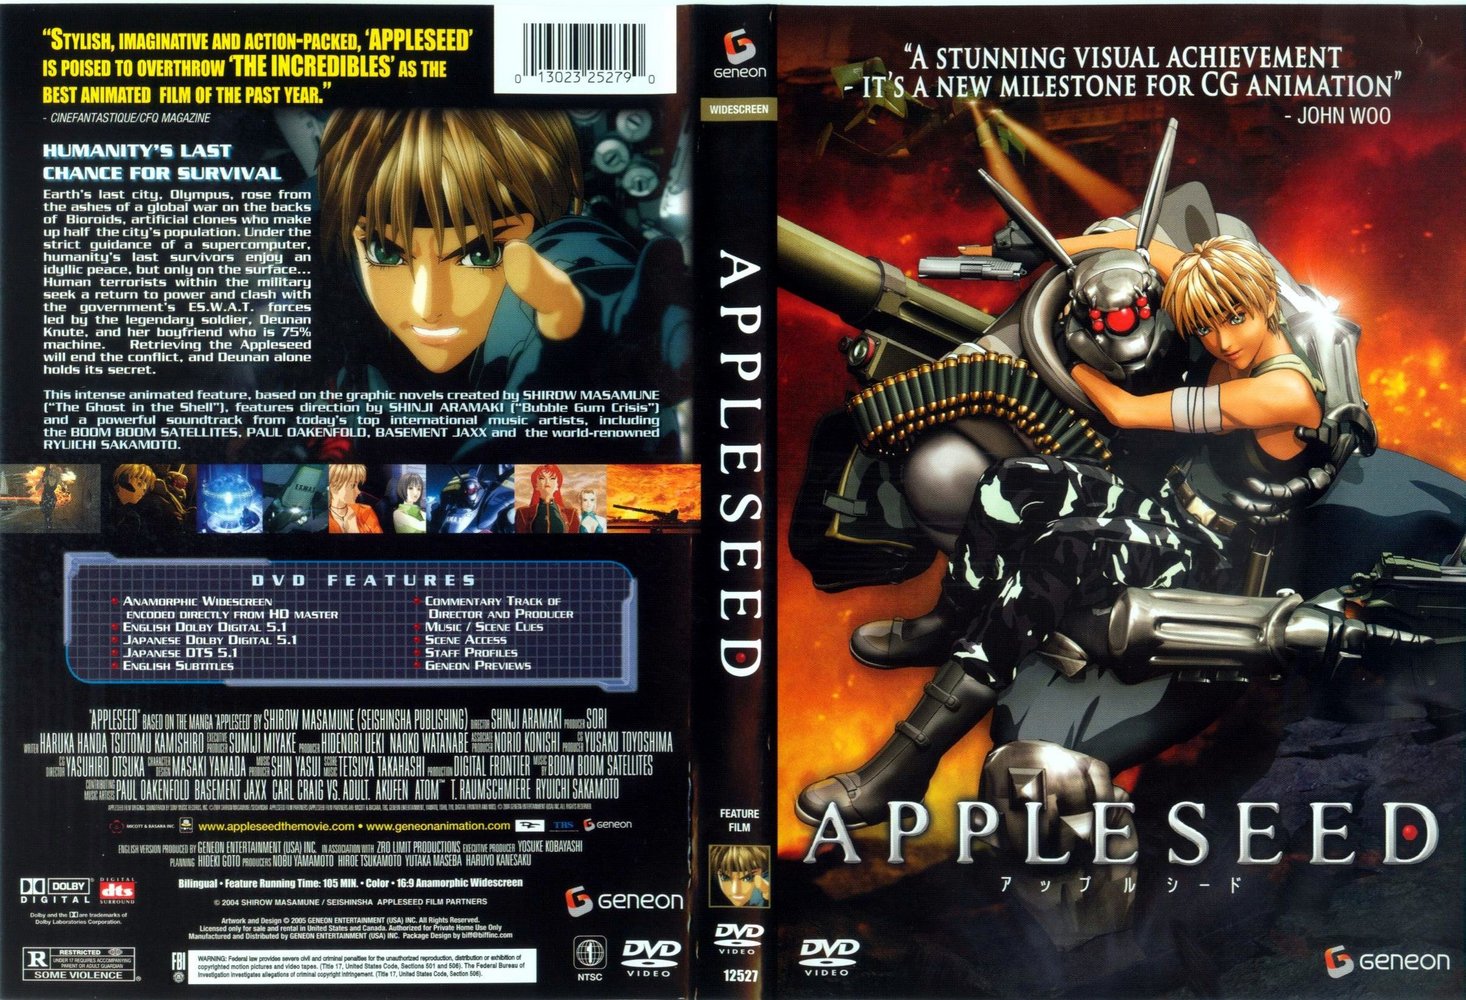 Appleseed #14